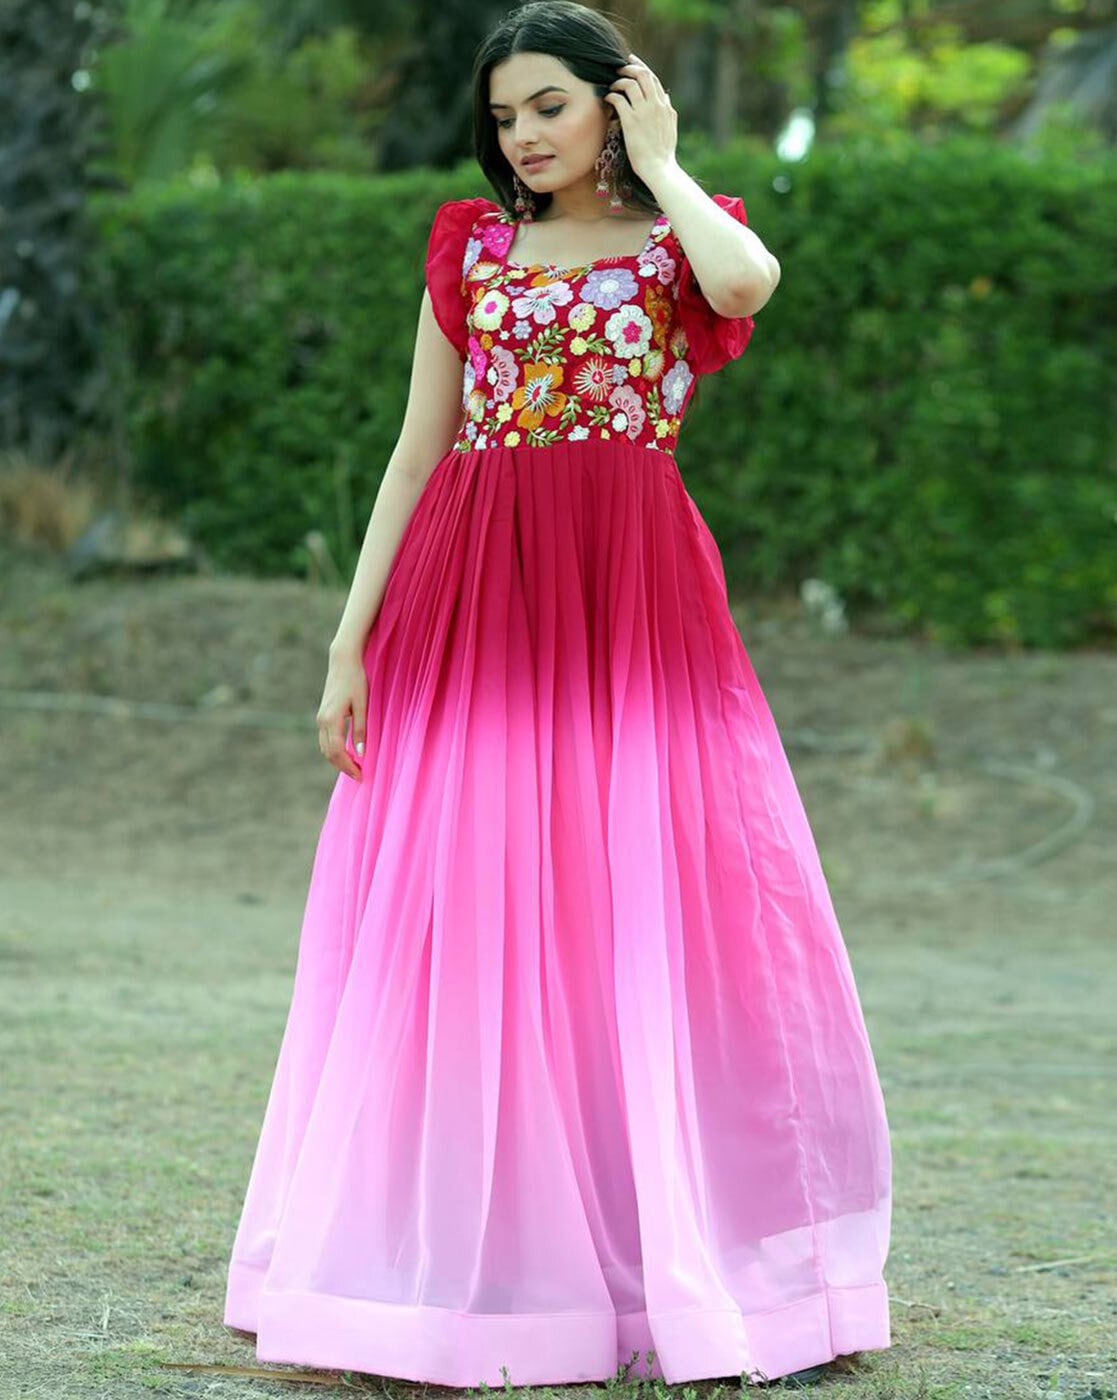 Girls Rani Pink Gown Dress - EVERWILLOW - 3446276